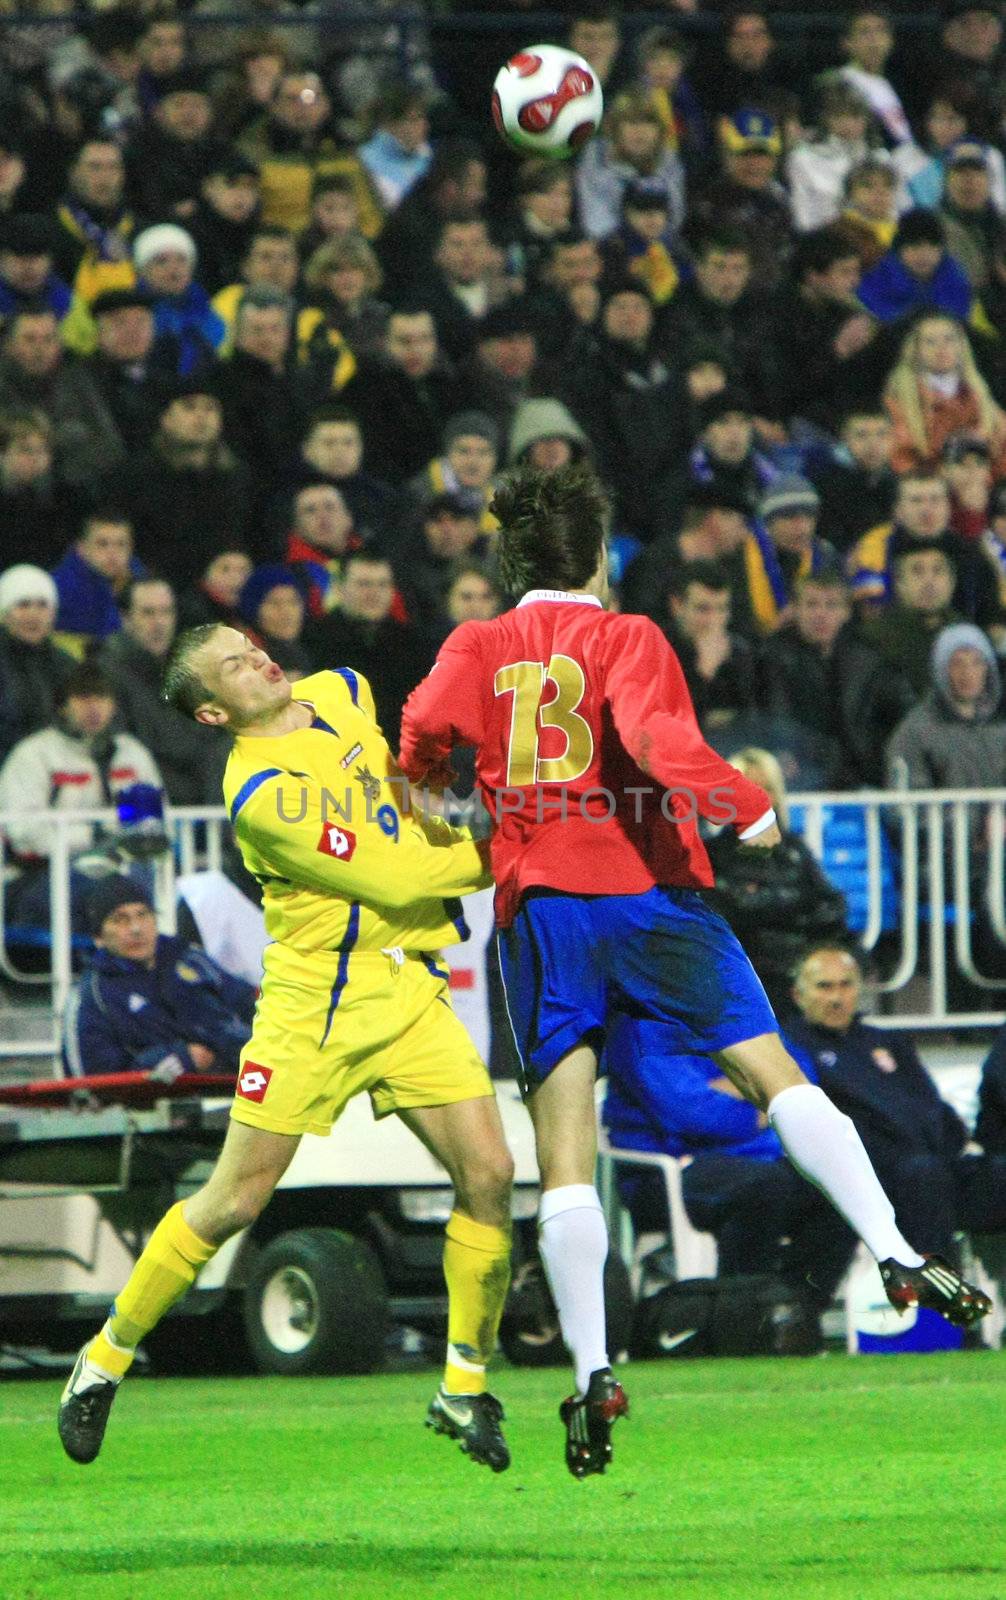 KYIV, UKRAINE - MARCH 26: Oleh Husyev (C) and Aleksandar Lukovic fight for a ball during the friendly match between the Ukrainian and Serbian national teams on Marc 26, 2008 in Kyiv, Ukraine